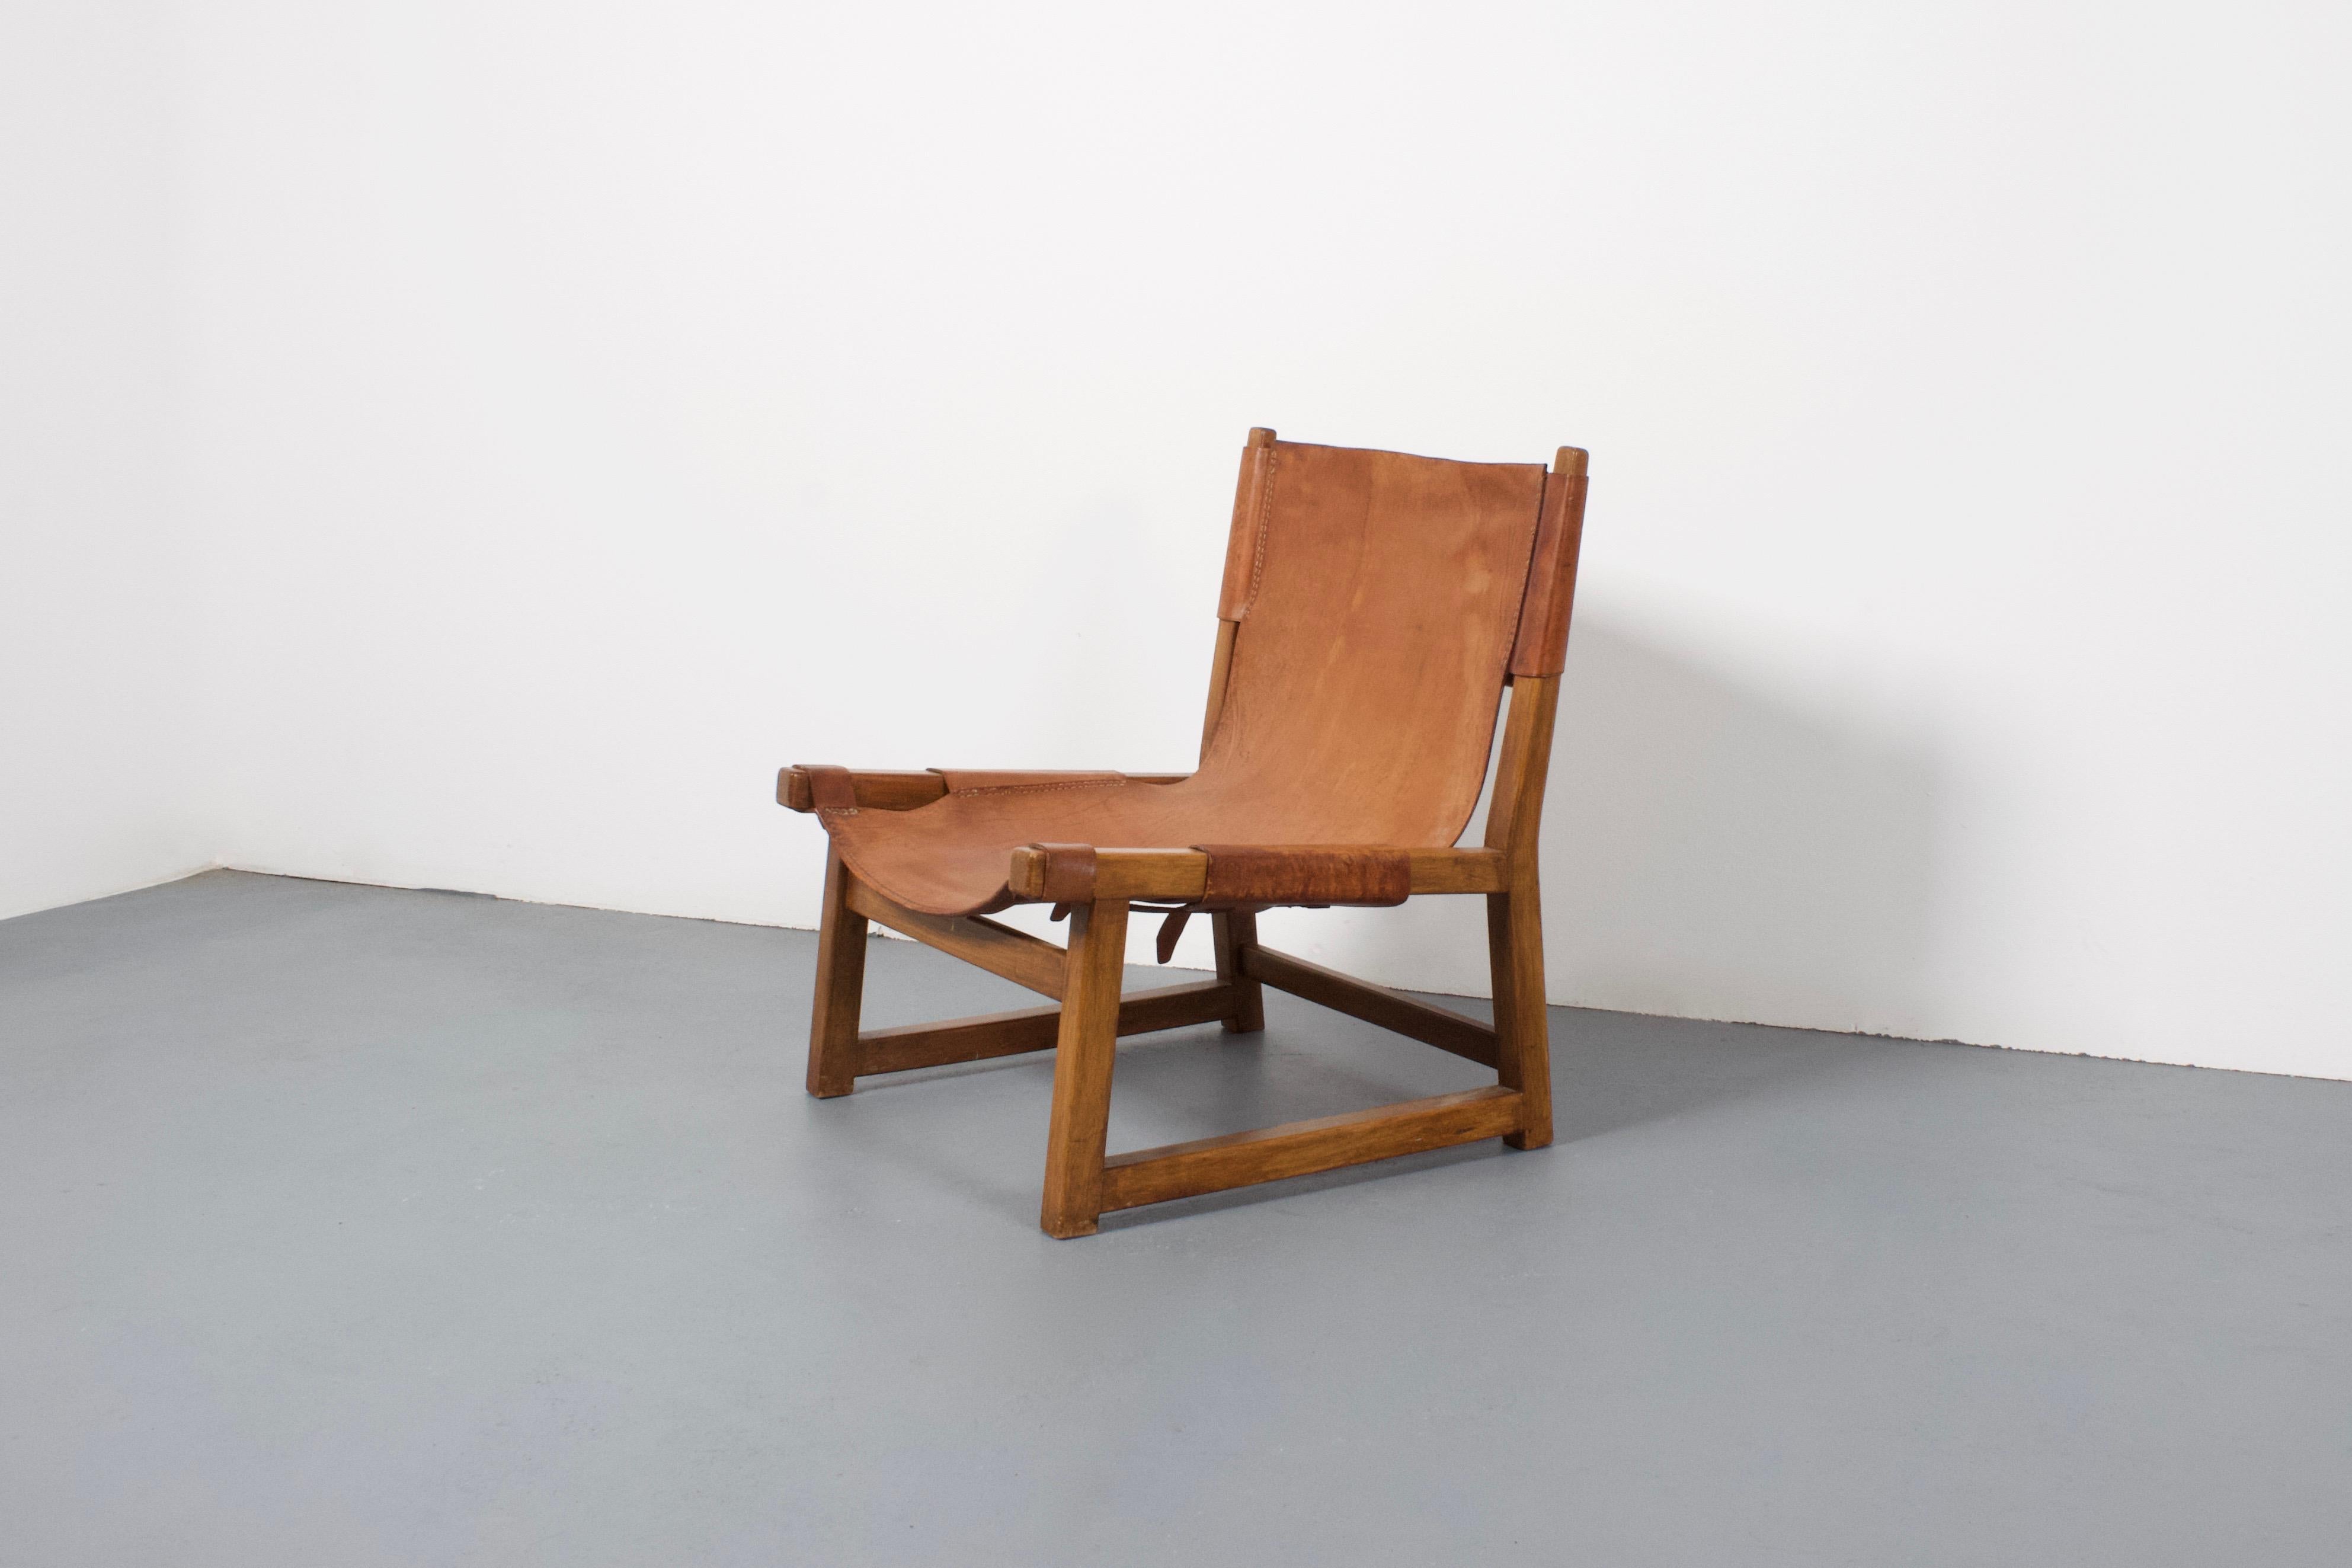 Hunting chair by Paco Muñoz in beautiful condition.

This low lounge chair has a rustic solid oak frame.

The thick cognac colored leather is loosely attached to the frame with a strap on the underside.

The leather has a great patina and is in very